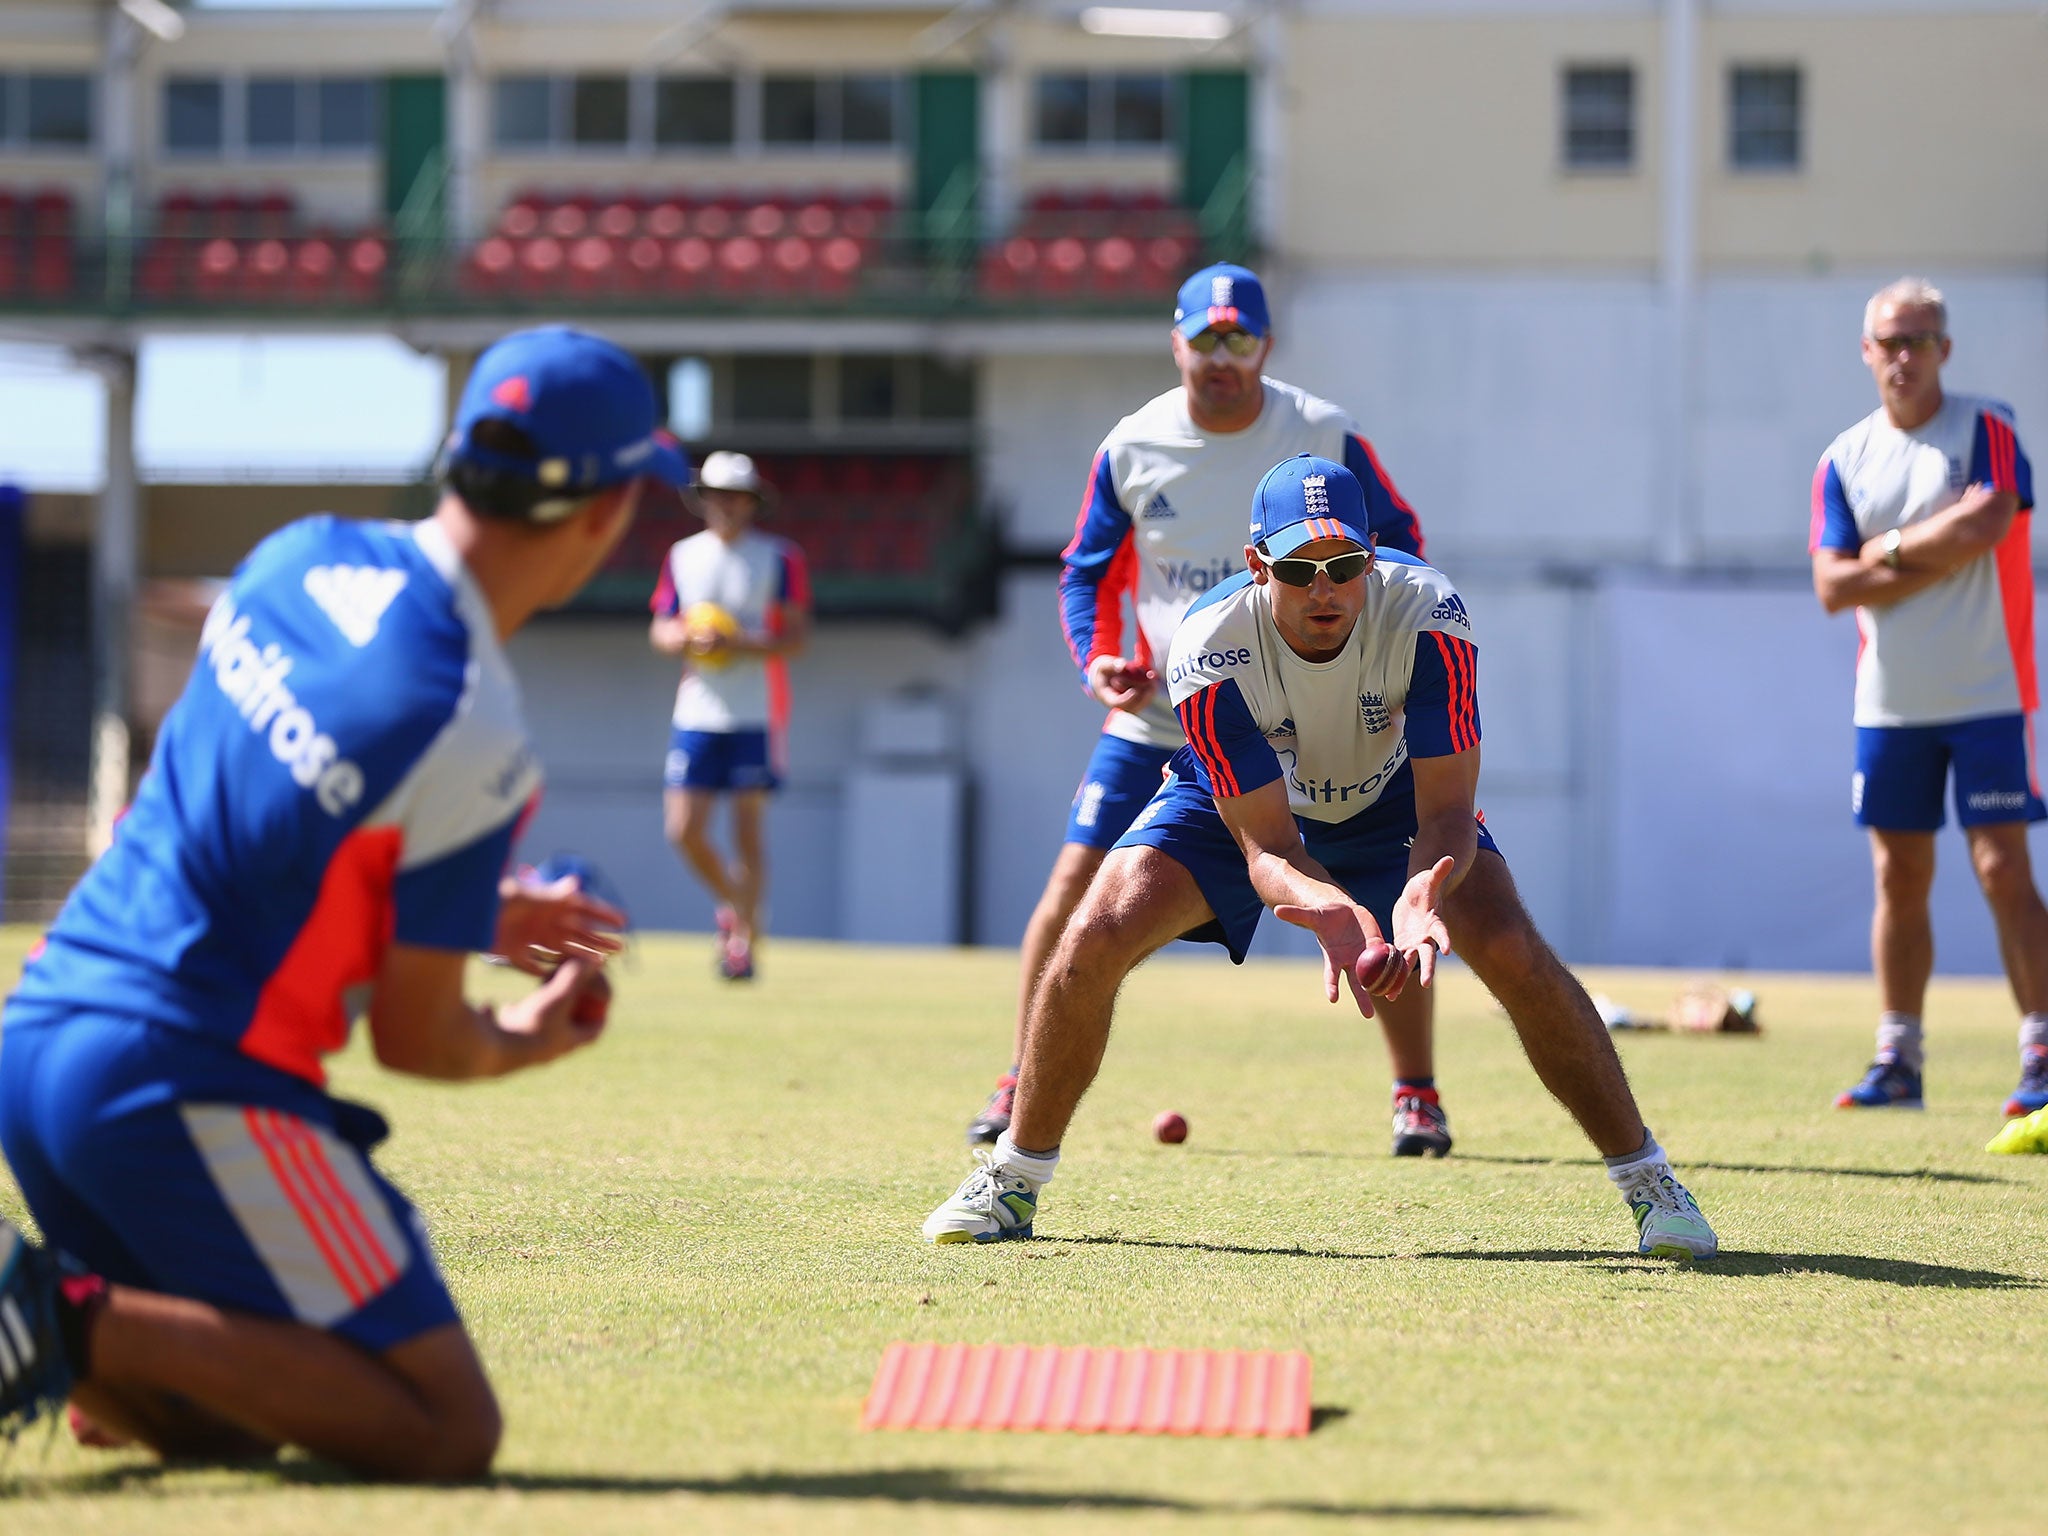 The England captain, Alastair Cook, takes a catch in practice in Basseterre, St Kitts